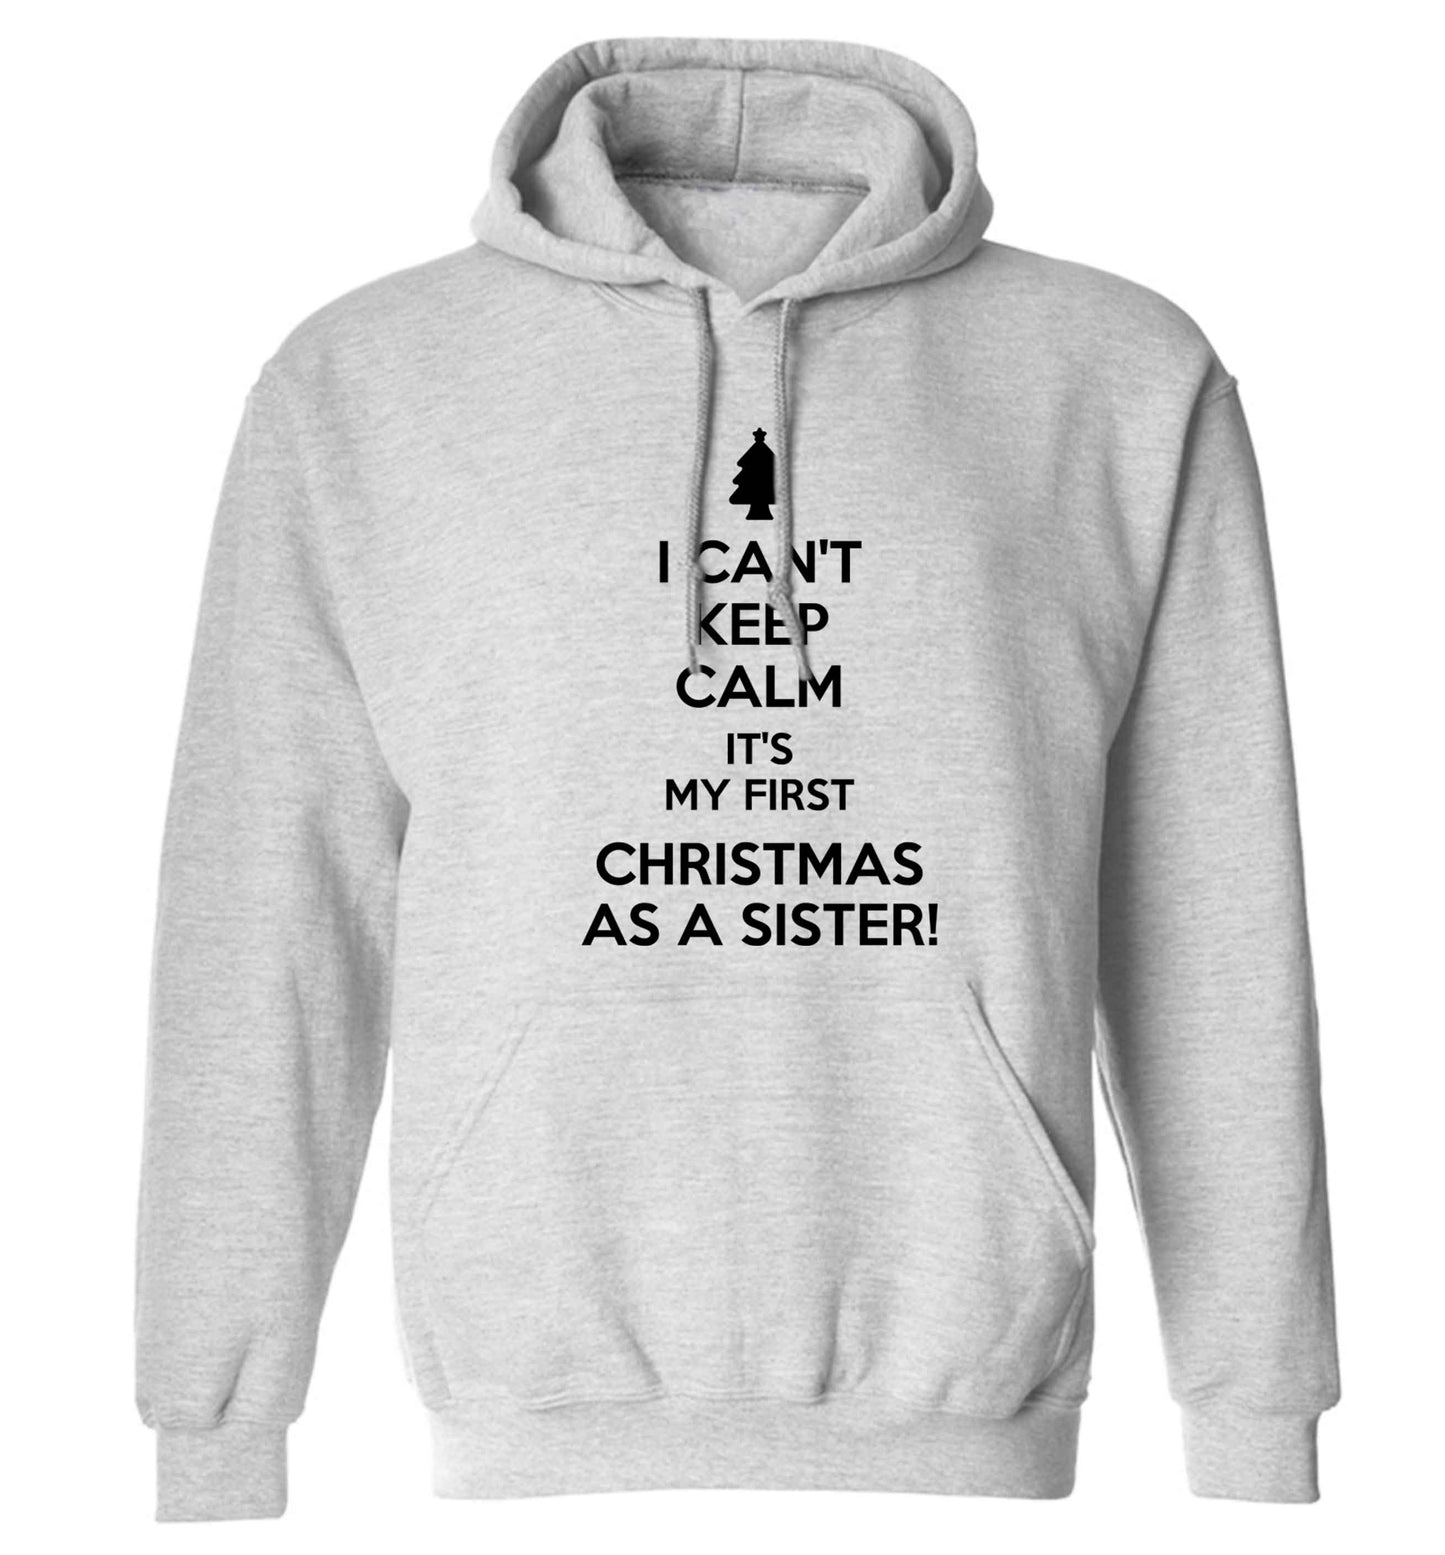 I can't keep calm it's my first Christmas as a sister! adults unisex grey hoodie 2XL